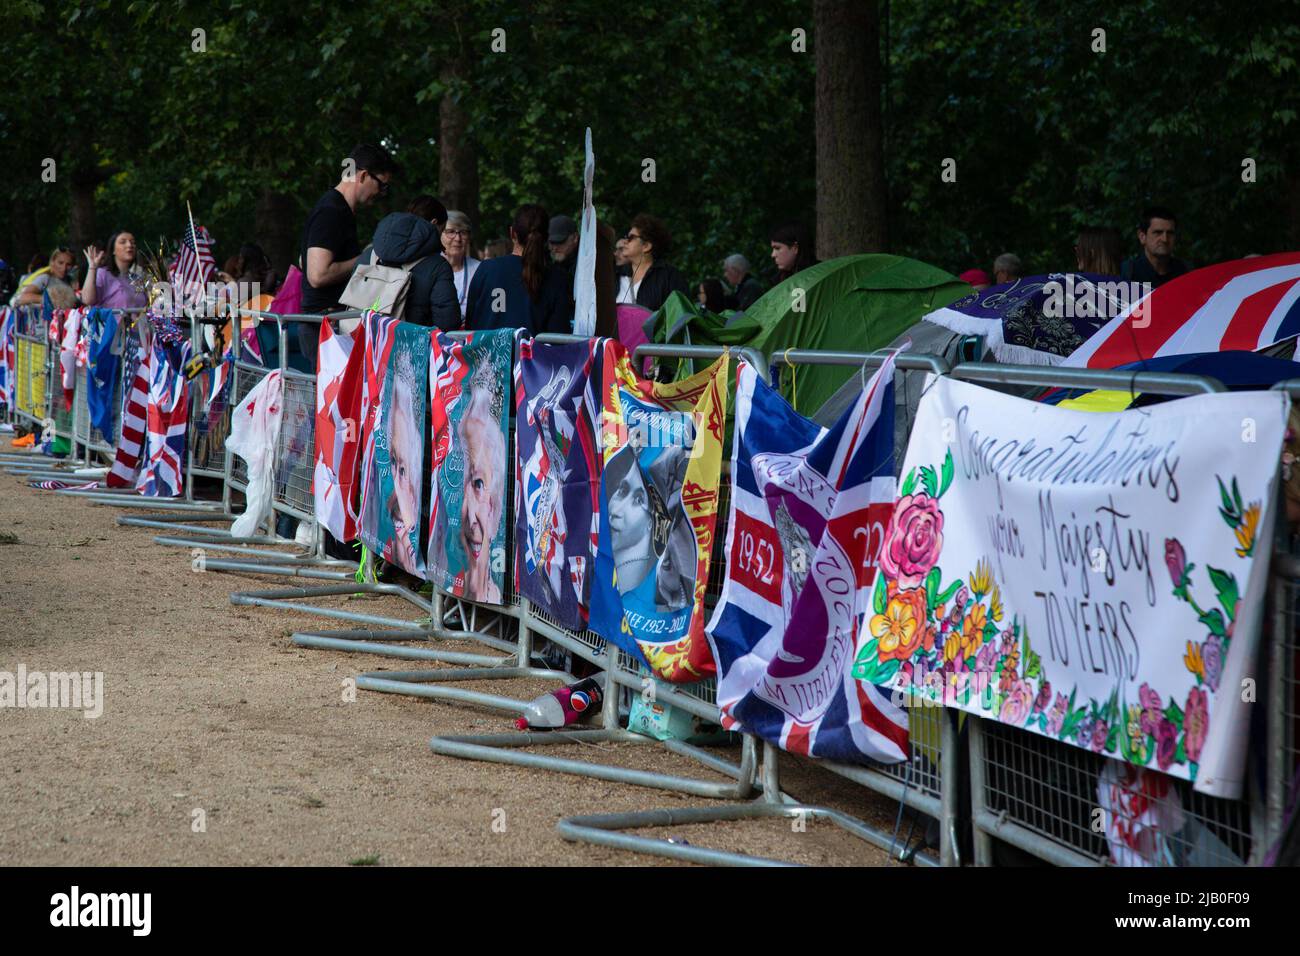 London, UK. Ist June 2022. Royal fans have come to the Mall to save a prime spot for tomorrow's Platinum Jubilee event to celebrate Queen Elizabeth II's 70 years on the throne. Credit: Kiki Streitberger / Alamy Live News Stock Photo